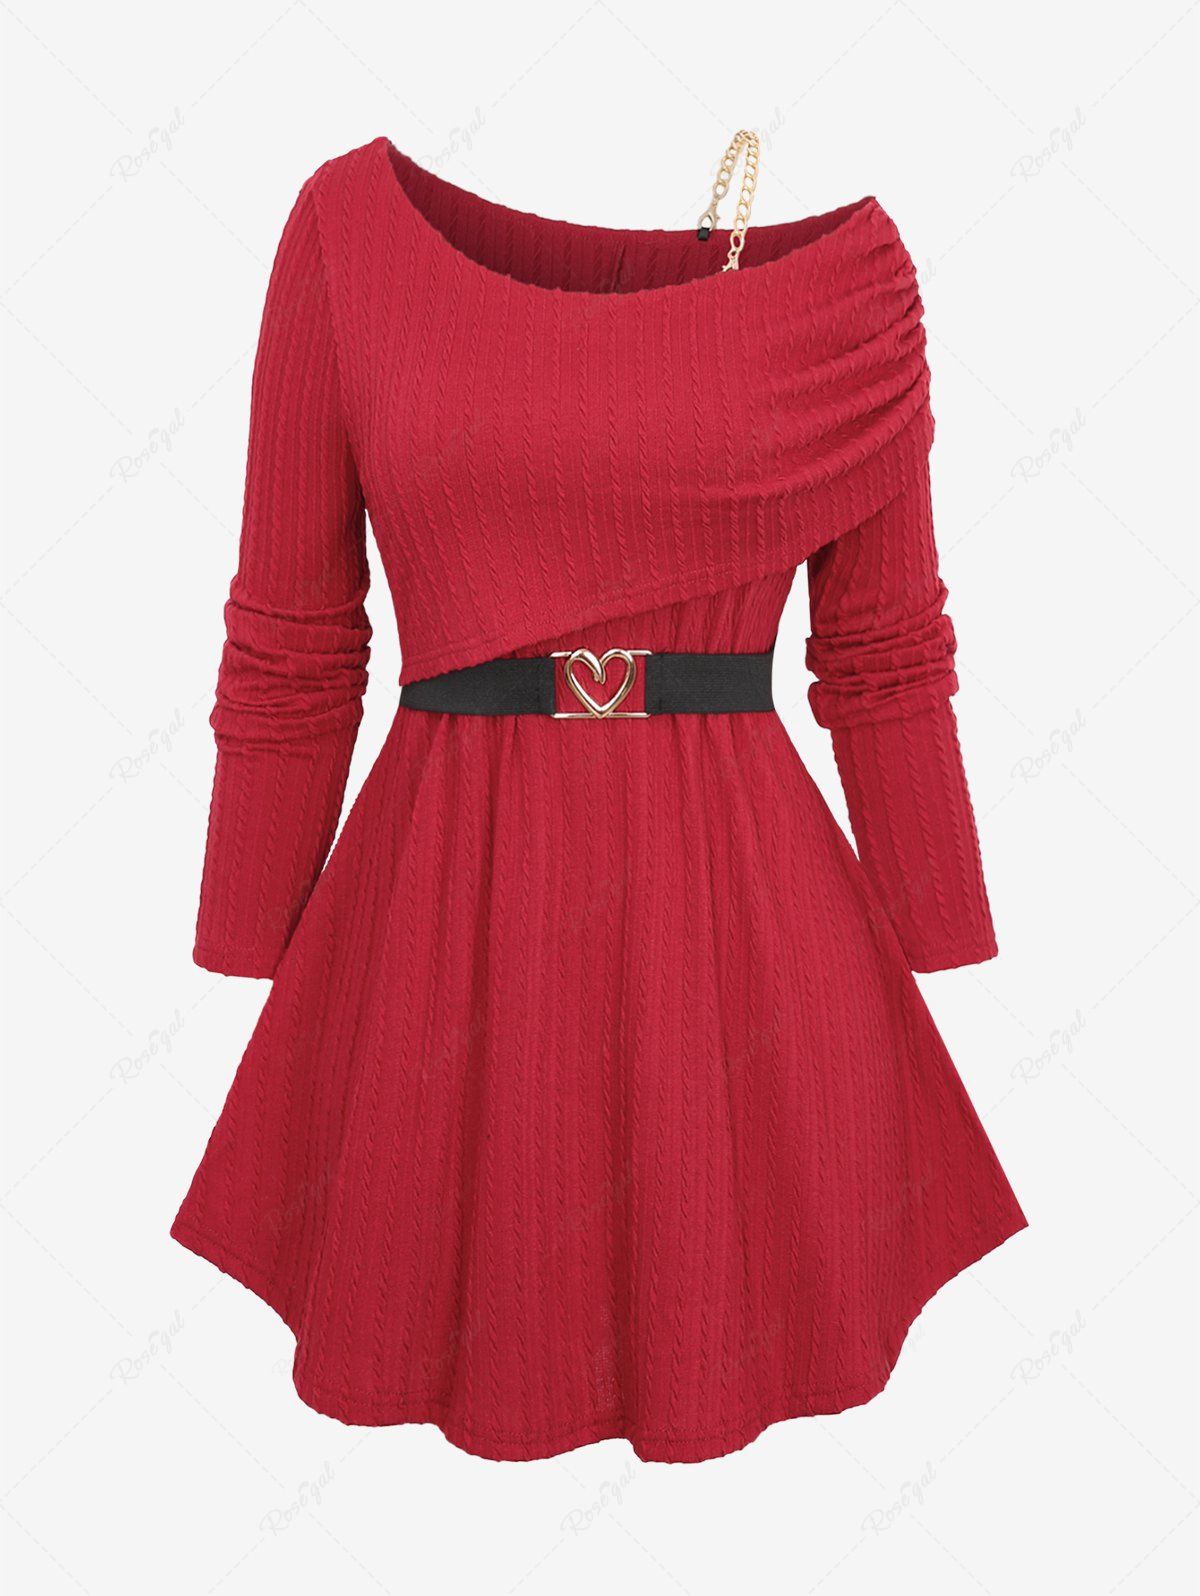 Outfits Plus Size One Shoulder Textured Ribbed Cinched Solid Long Sleeves Knit Top with Removeble Chain and Heart Buckle Belt  